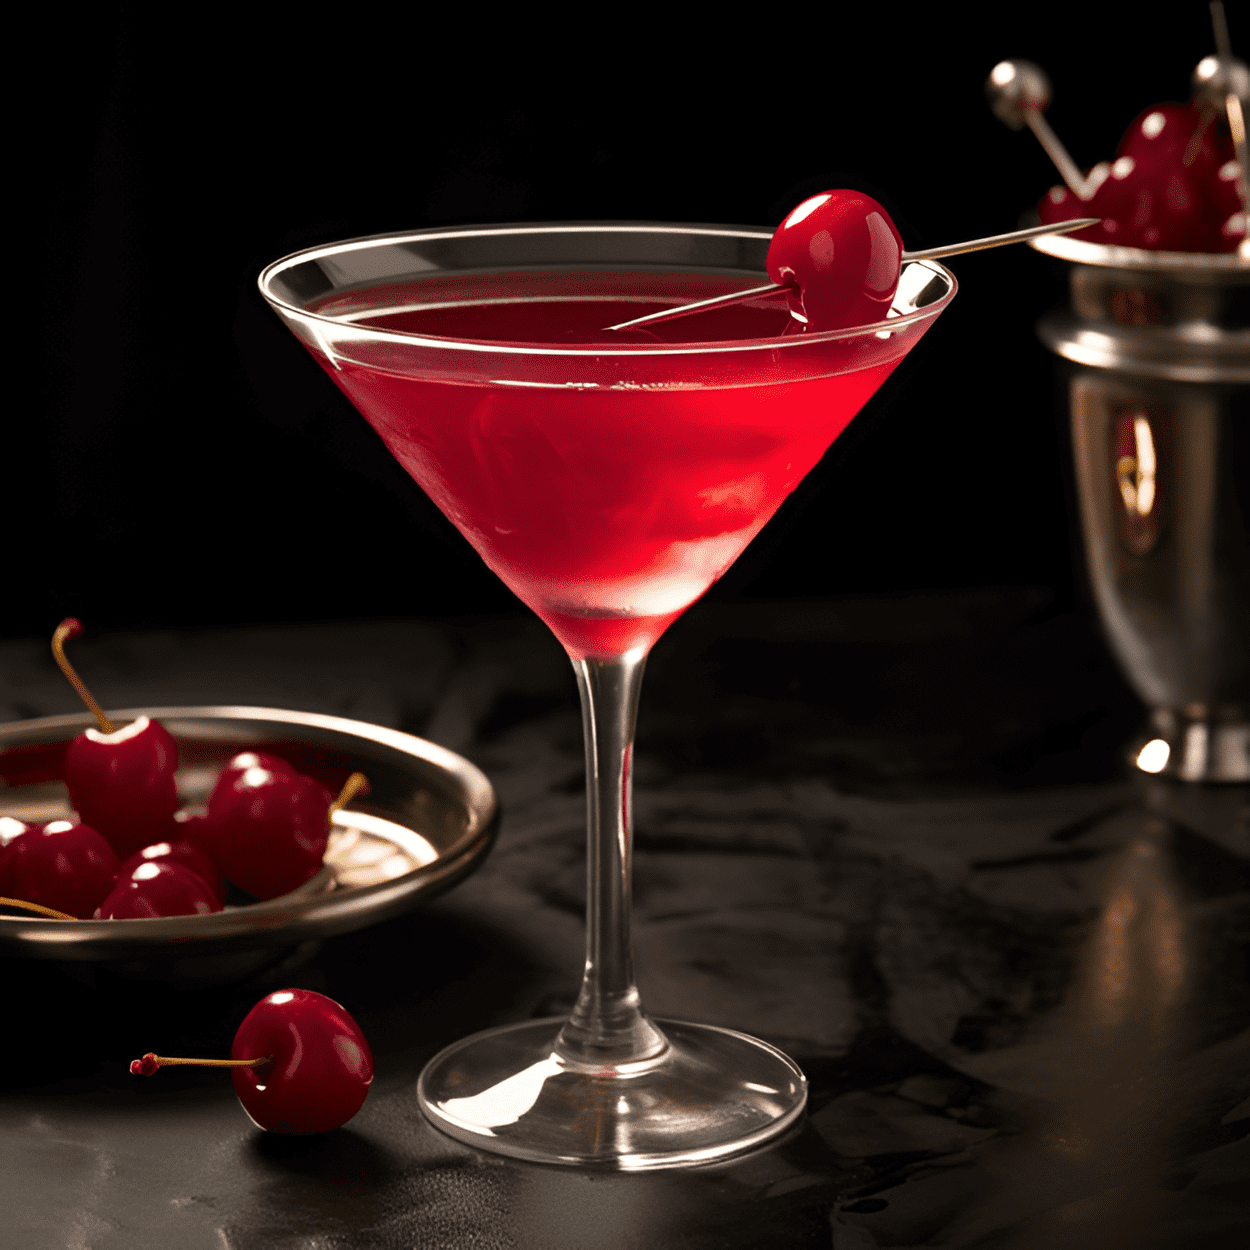 Amarena Cherry Cocktail Recipe - The Amarena Cherry Cocktail is a harmonious blend of sweet, sour, and slightly bitter flavors. The sweetness of the cherry syrup is balanced by the tartness of the lemon juice, while the vodka adds a smooth, clean finish. The Amarena cherry garnish adds a touch of bitterness, making this cocktail a well-rounded, flavorful experience.